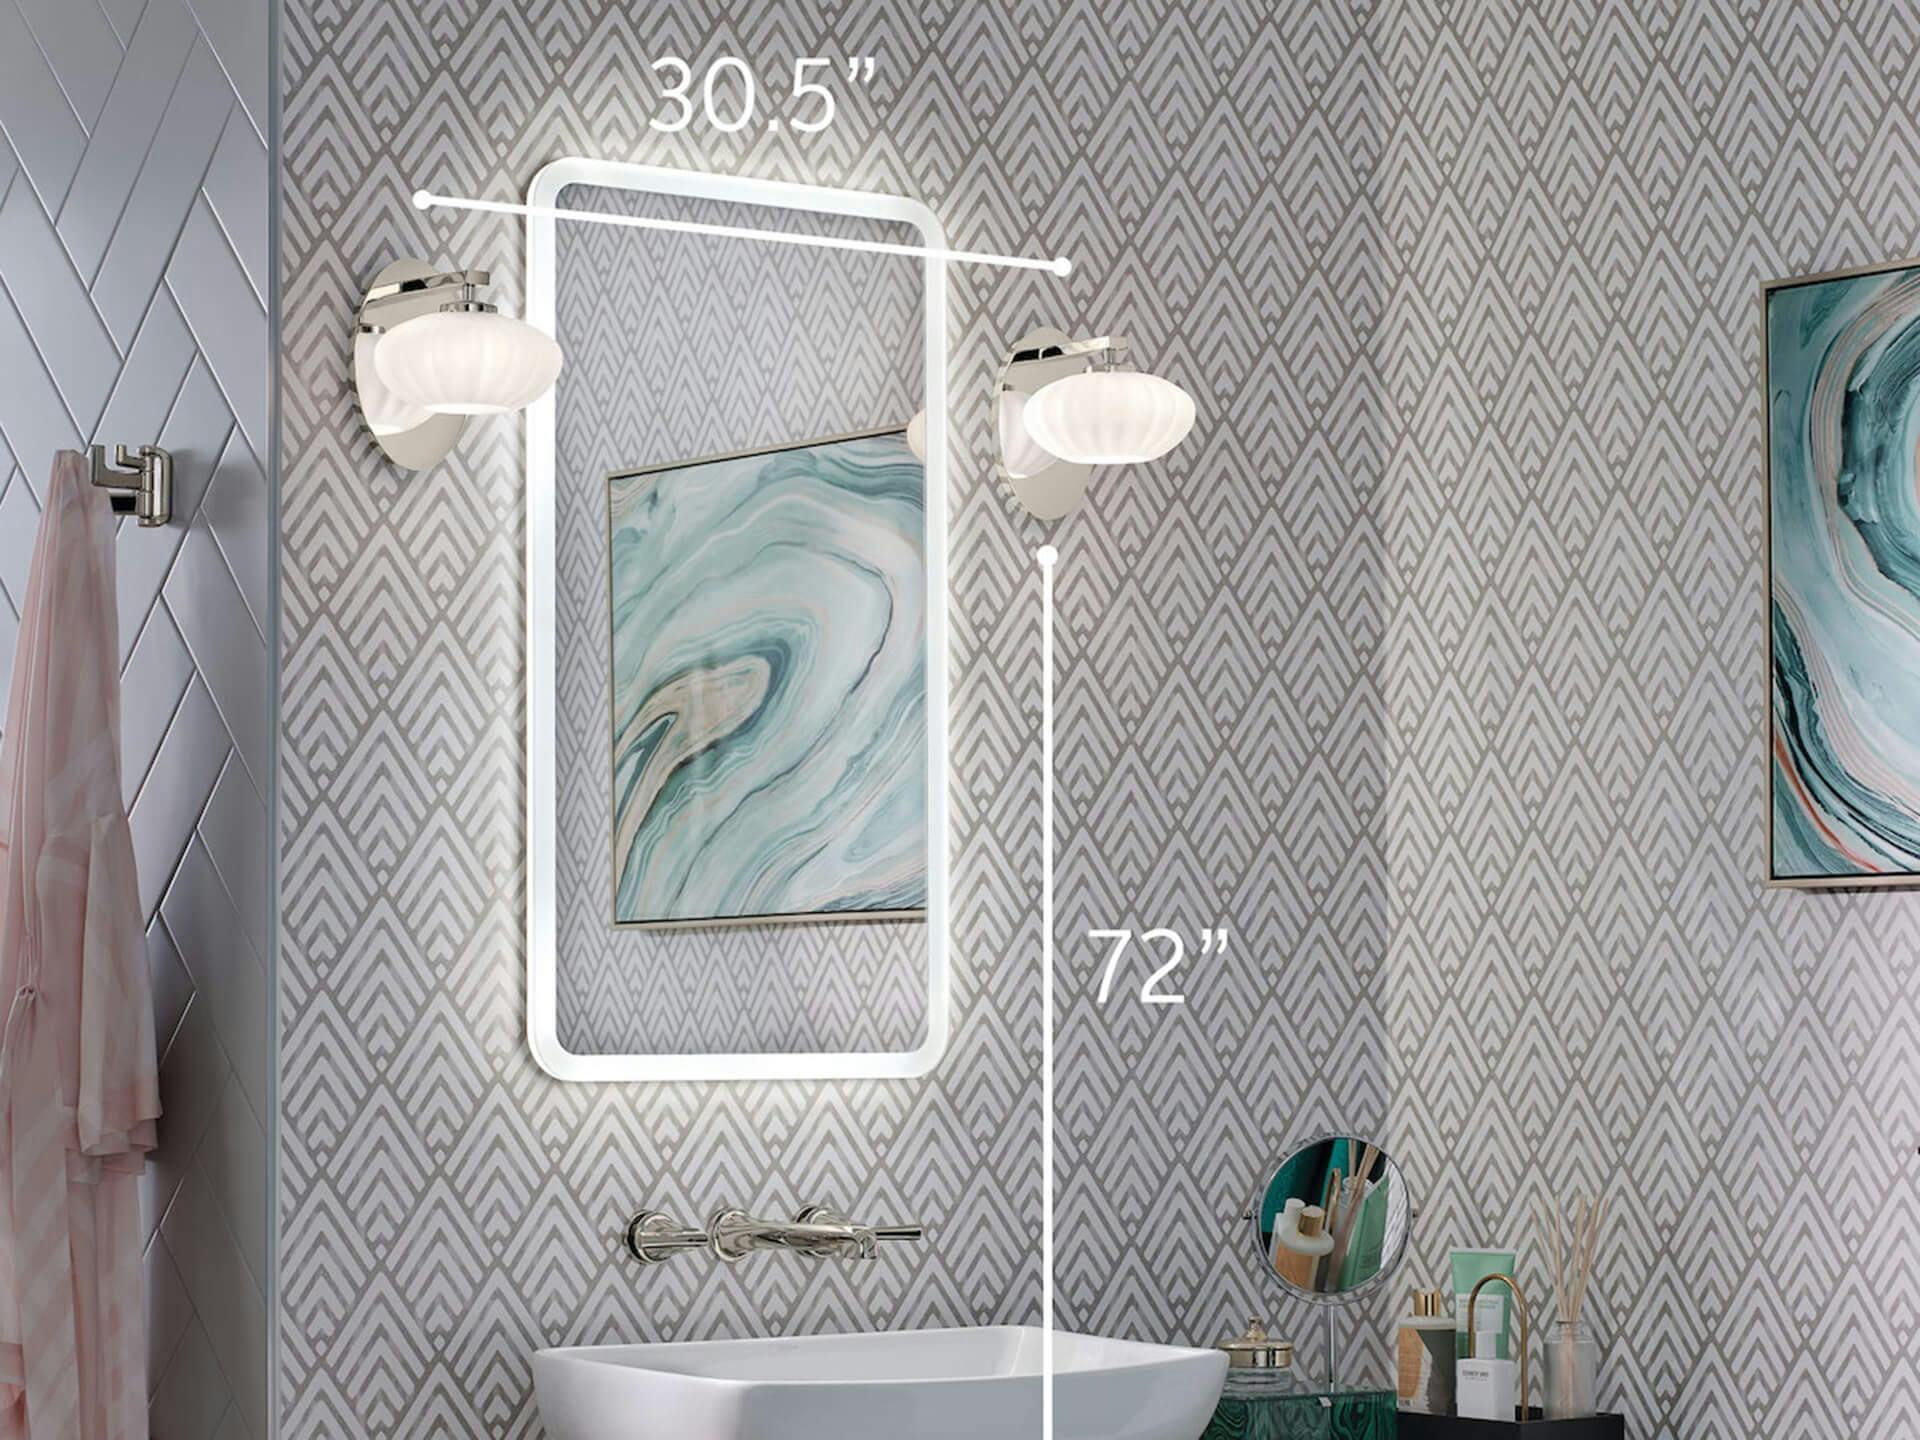 An example measurement guide featuring two Pim silver sconces on either side of a bathroom mirror, 30.5 inches apart and 72 inches from the ground